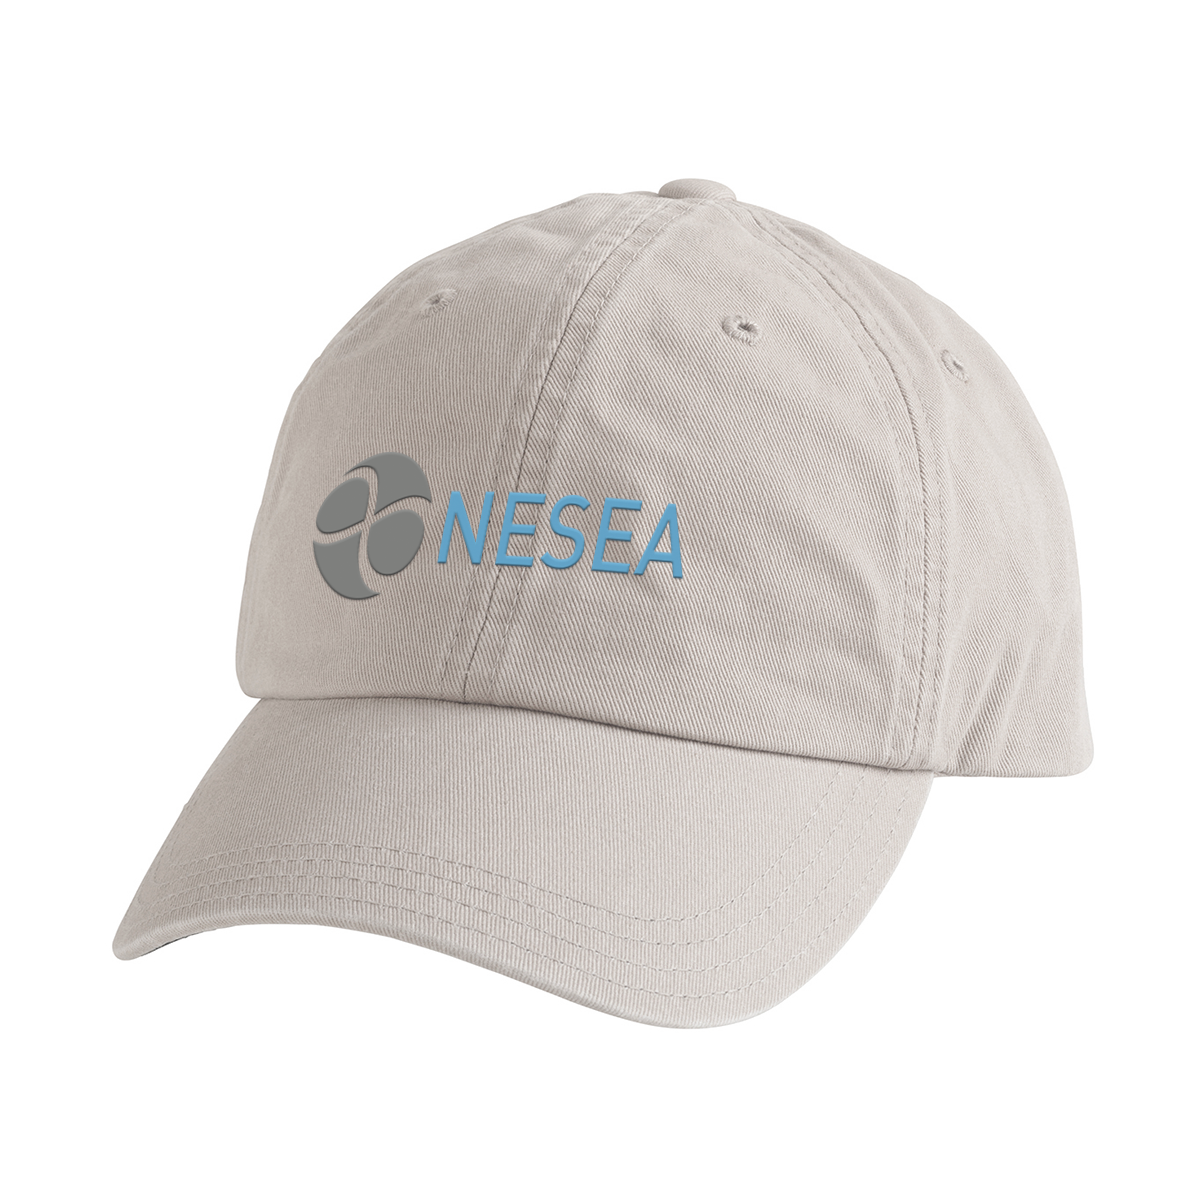 NESEA Unstructured Hat (available in 3 colors)